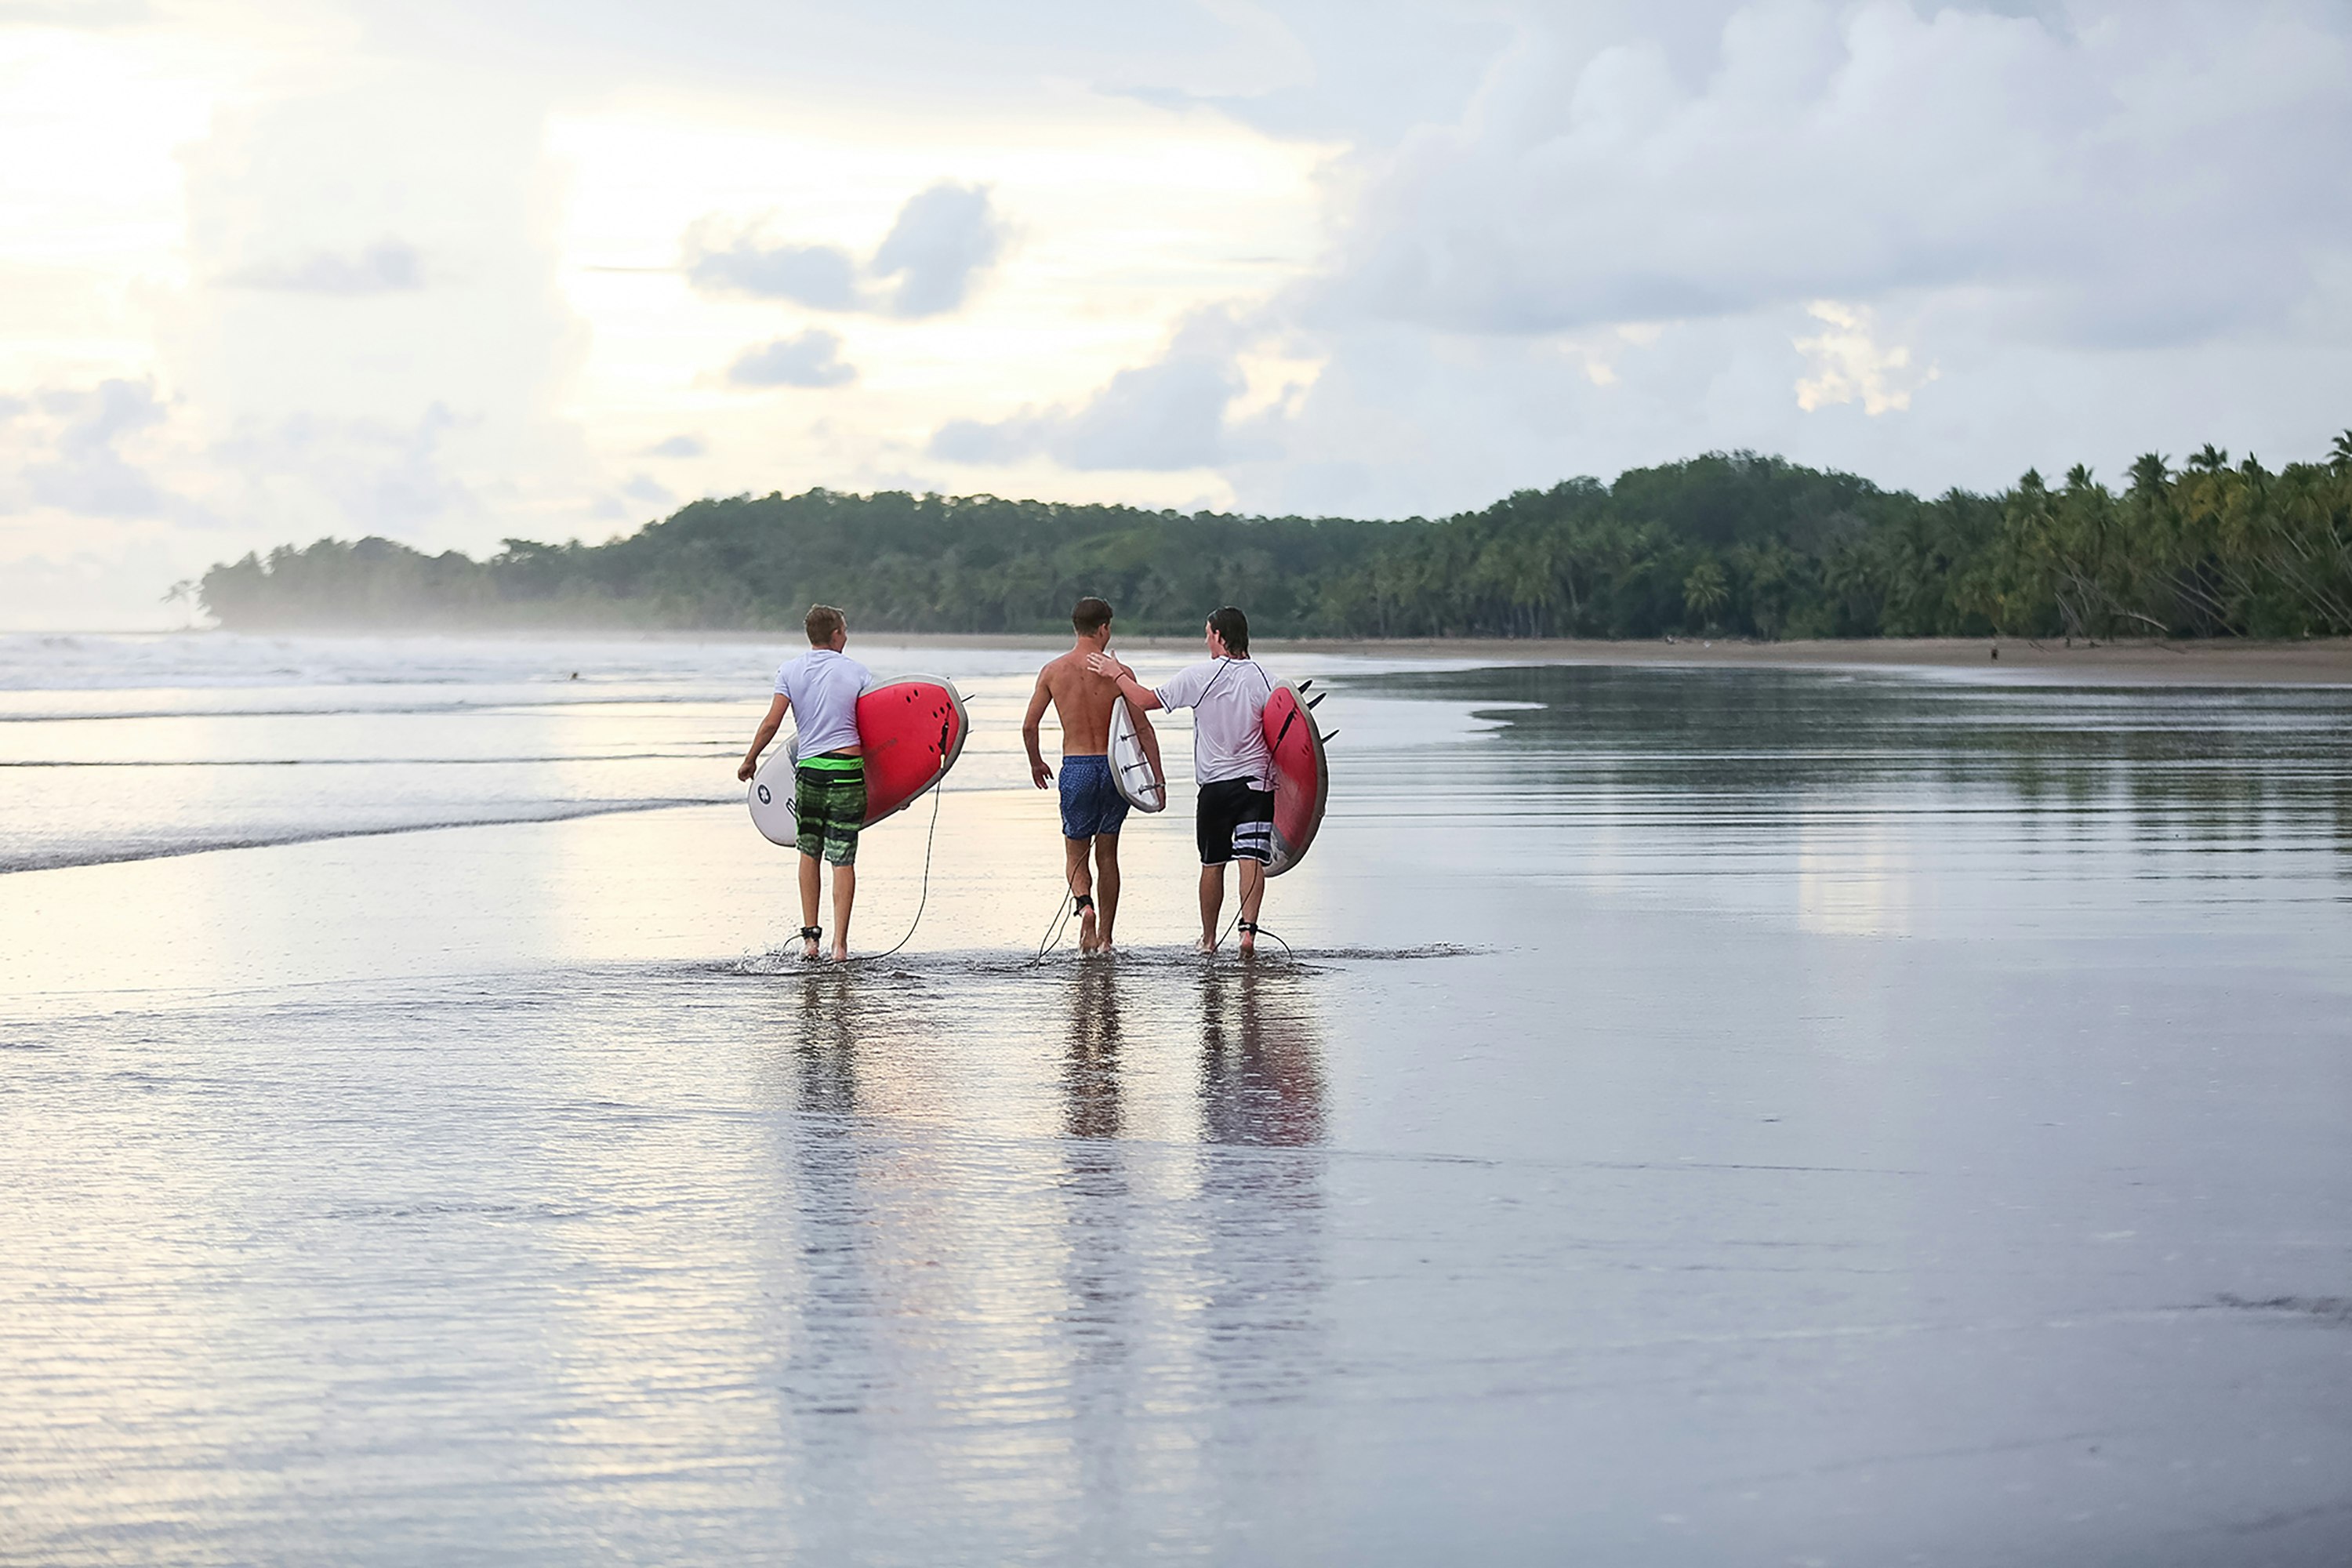 A Surf Tour of Costa Rica's Pacific Coast